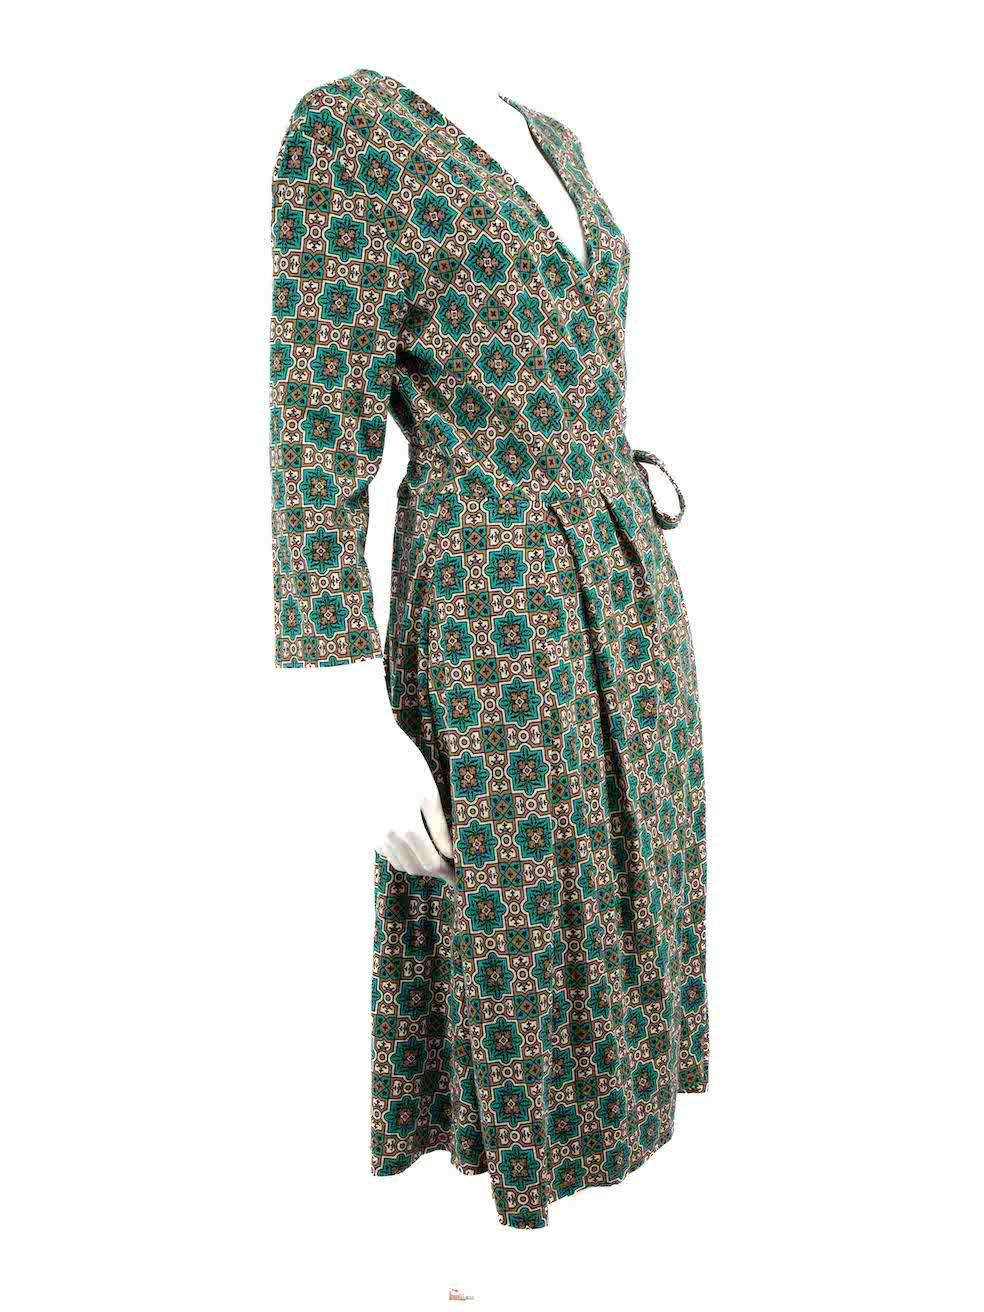 CONDITION is Never worn, with tags. No visible wear to dress is evident on this new Weekend Max Mara designer resale item.
 
 
 
 Details
 
 
 Multicolour - green and brown
 
 Viscose jersey
 
 Wrap dress
 
 Abstract pattern
 
 Knee length
 
 Long